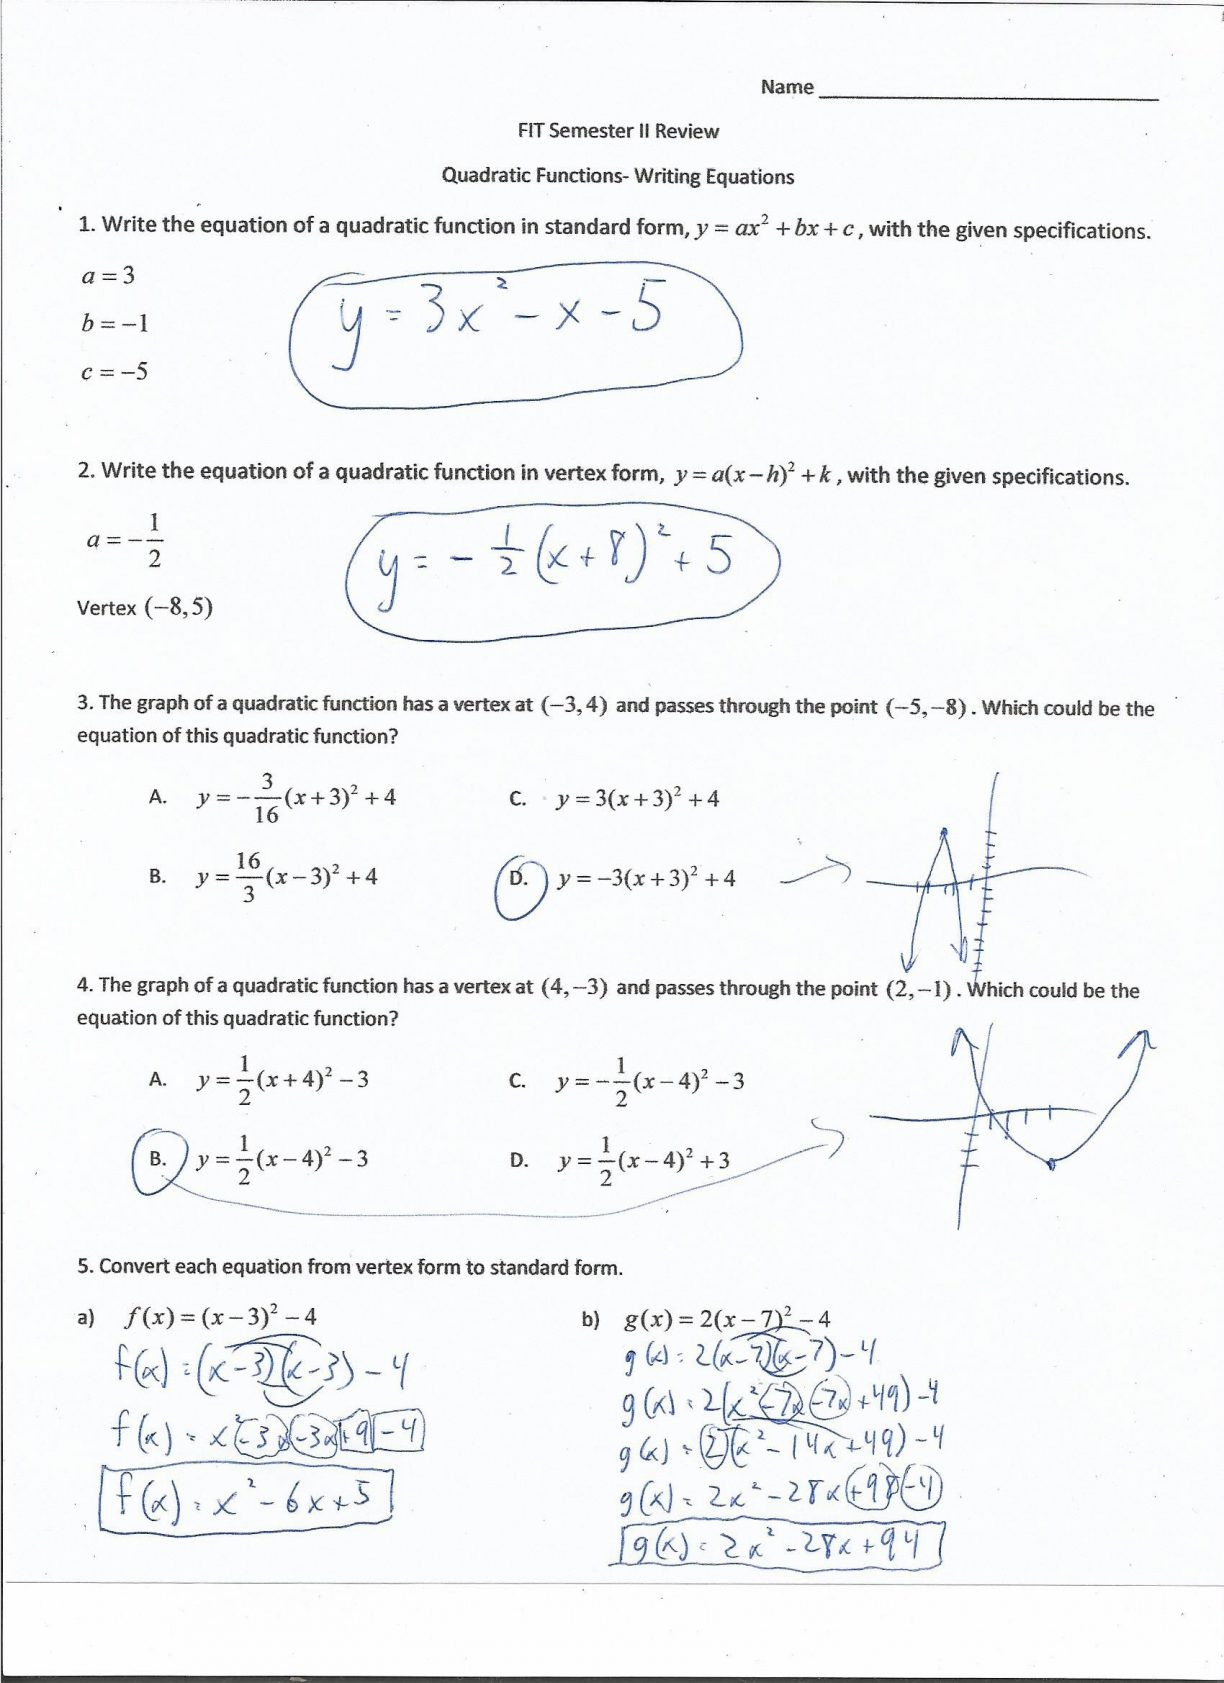 characteristics-of-linear-functions-practice-worksheet-b-answer-key